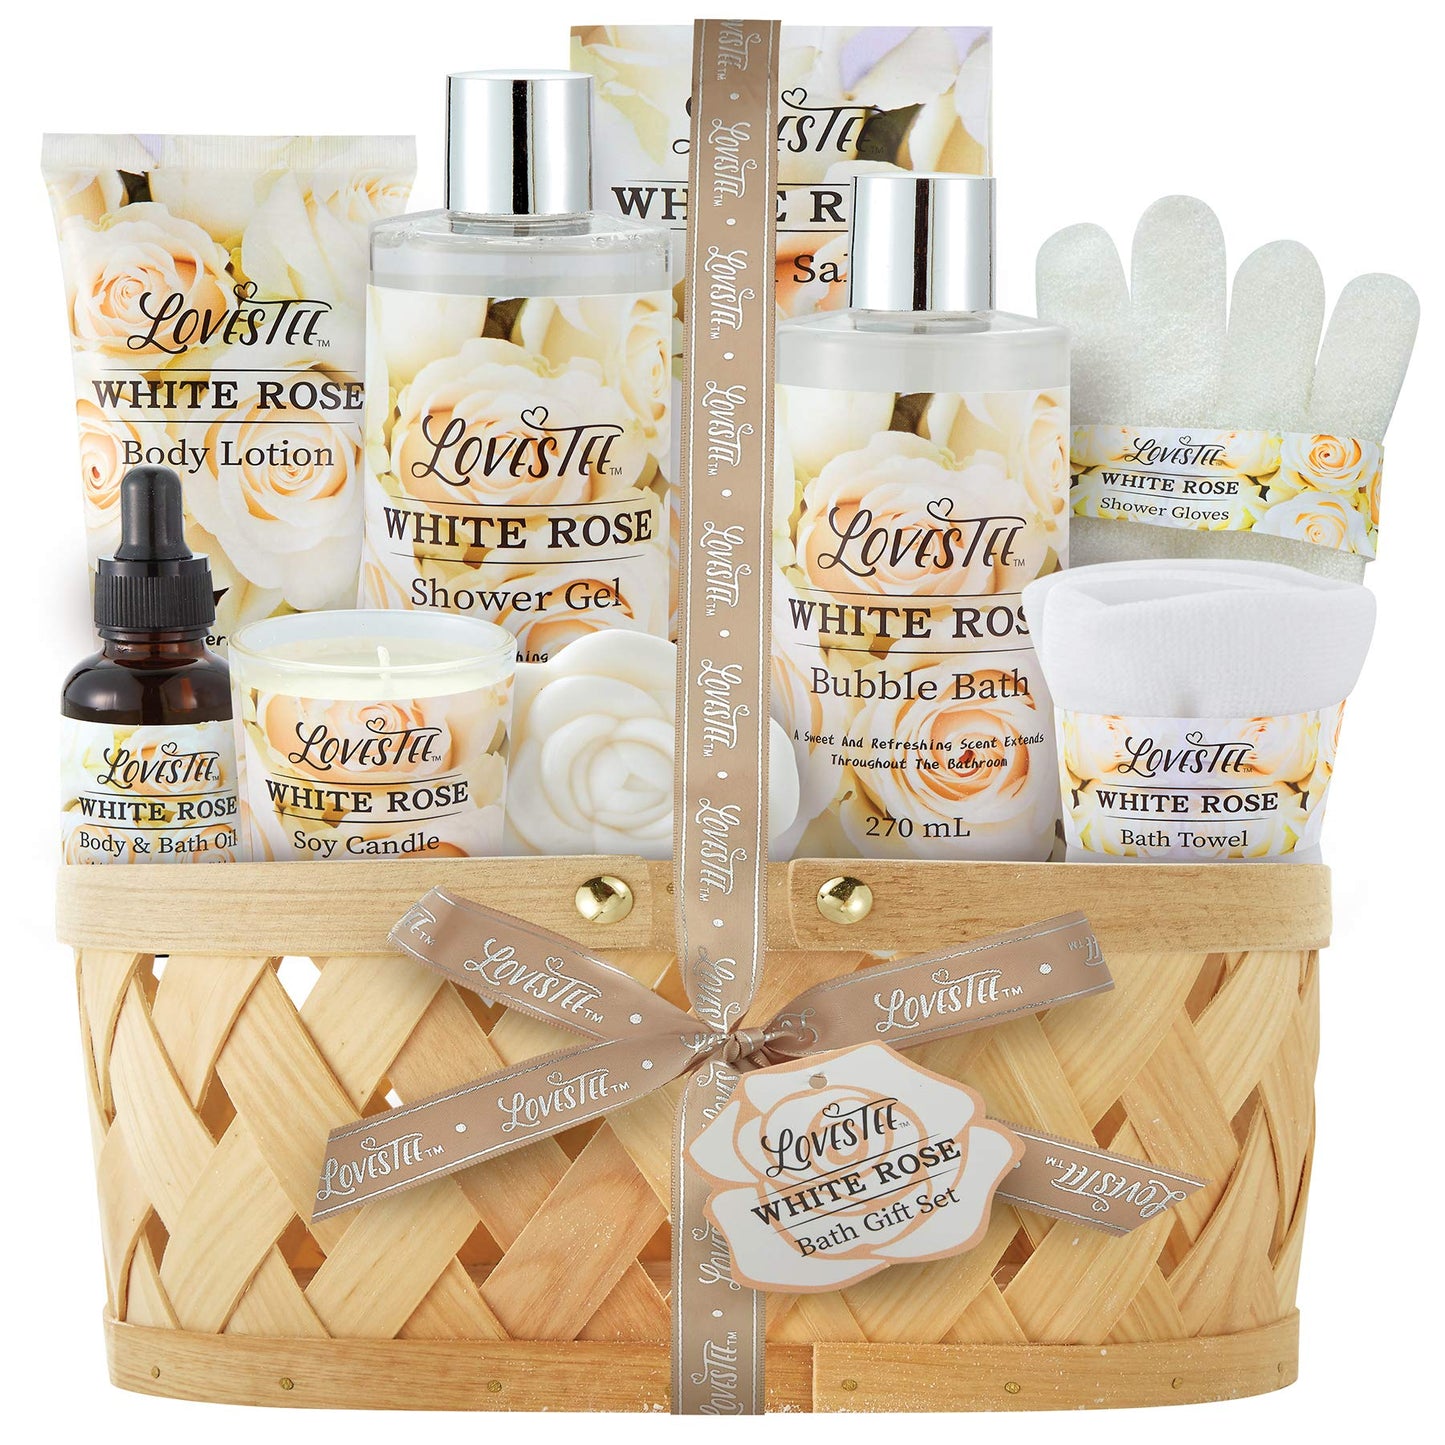 Mothers Day Bath & Body Spa Gift Basket for Women, Best Gift for Christmas & Birthday, White Rose Set Body Lotion, Shower Gel, Bubble Bath, Bath Salt, Towel, Soap, Oil, Candle, Gloves,